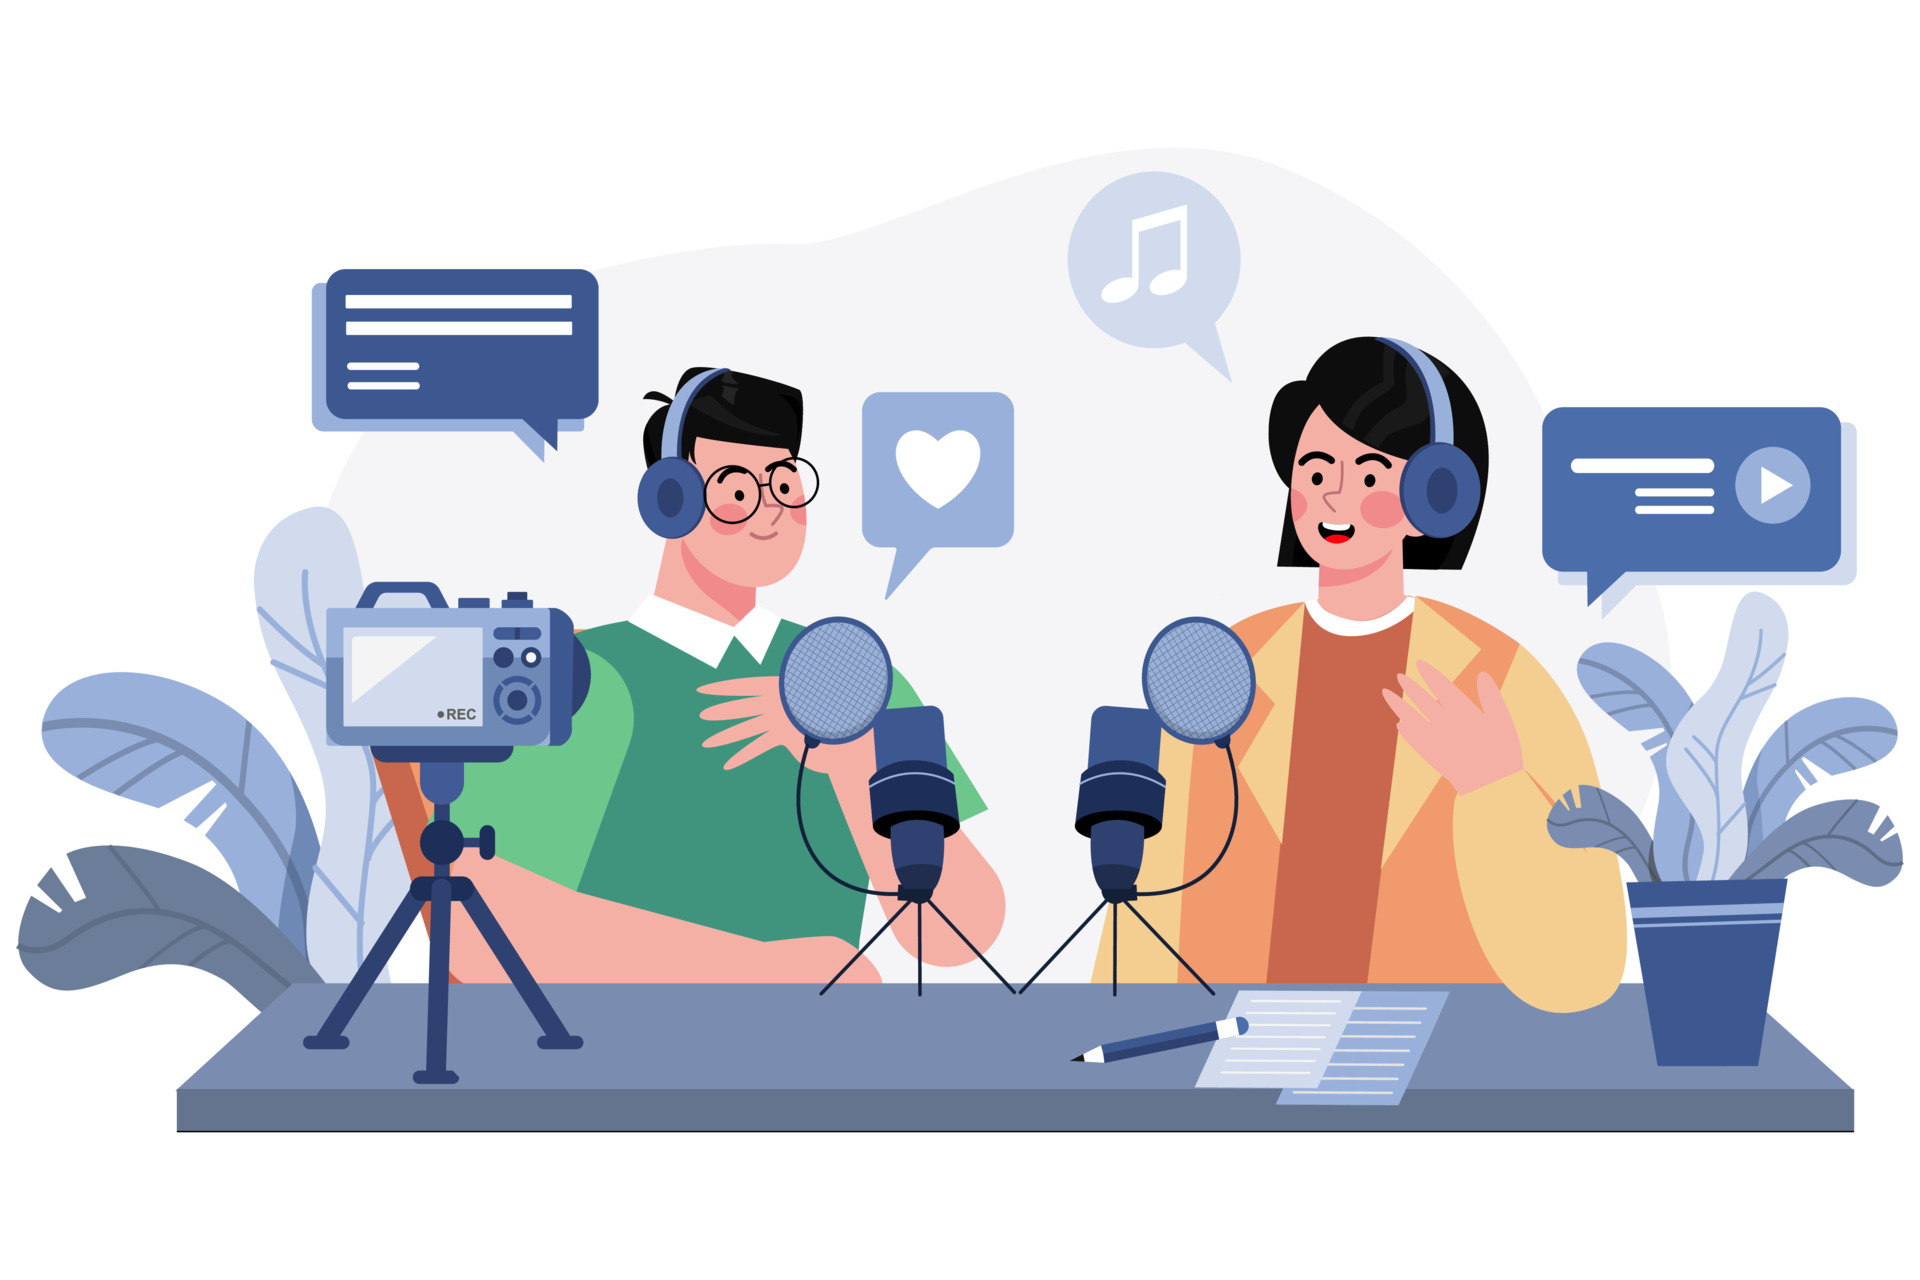 Podcast business - man and woman recording